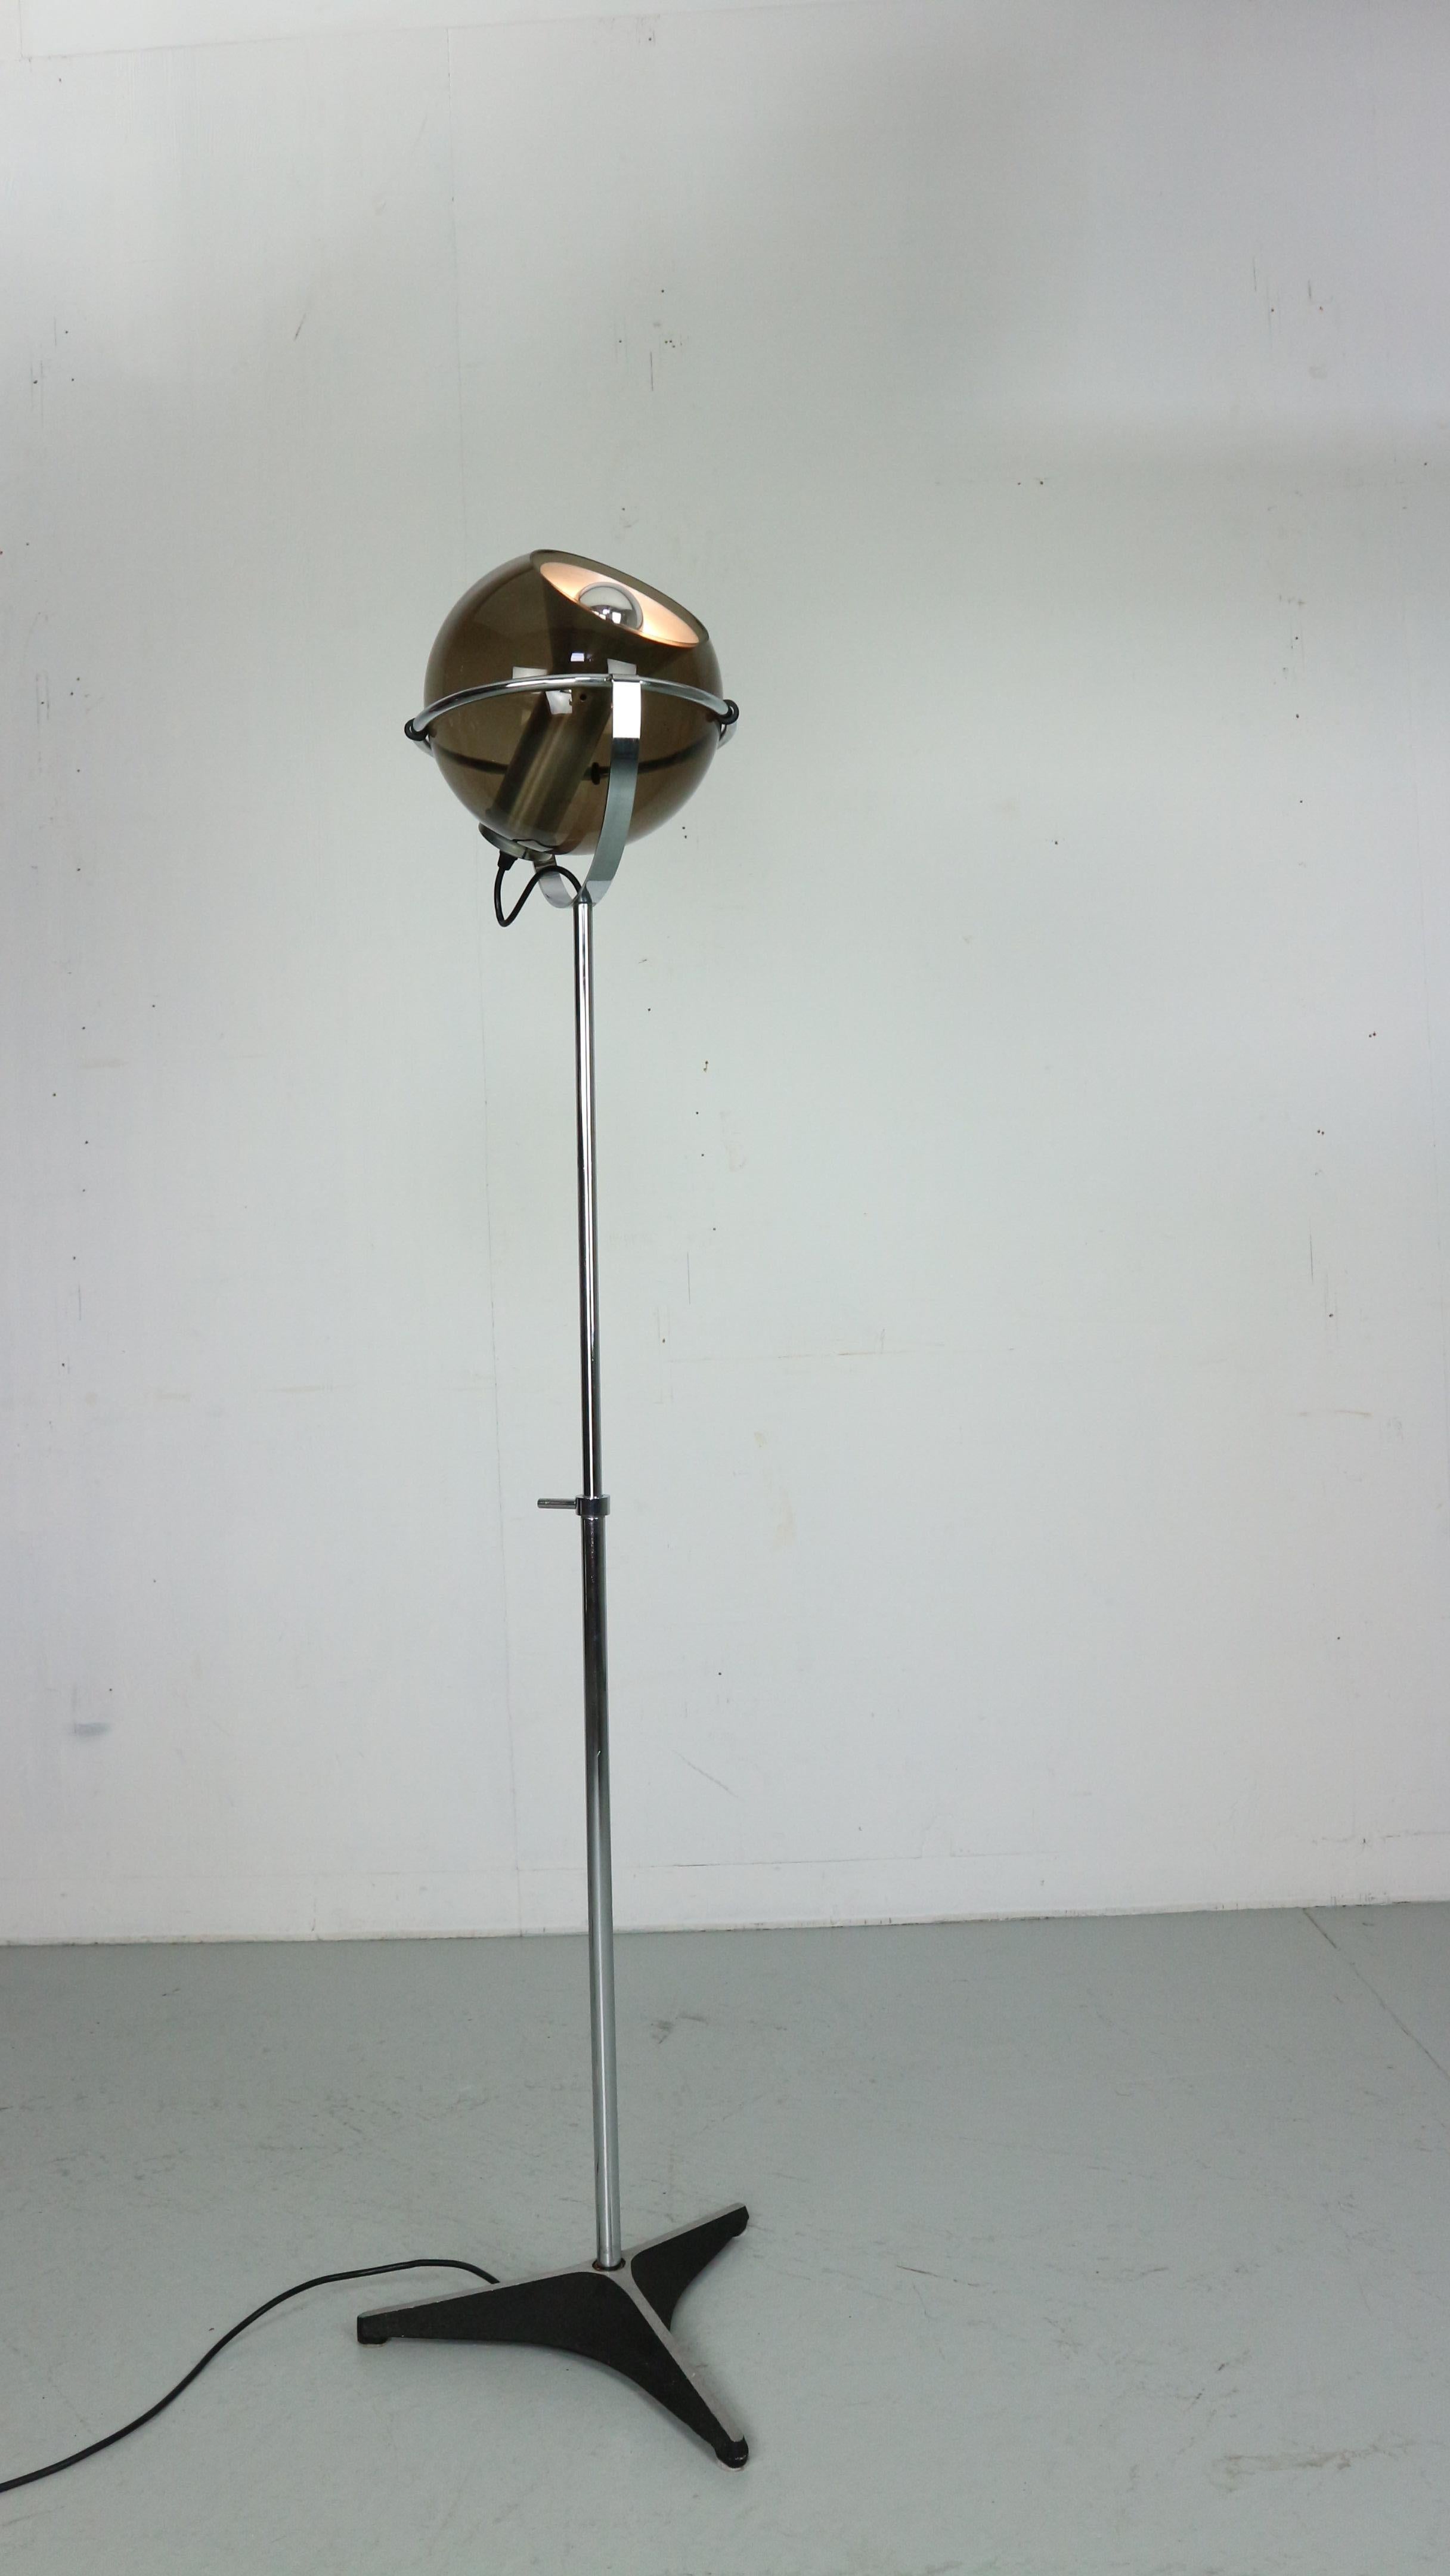 This beautiful 'Globe D-2000' floor lamp was designed by Frank Ligtelijn for Raak Amsterdam in the late 1950's. It has a smoked glass globe, (no chips) with an aluminum reflector and lamp holder, standing on a chromed metal adjustable rod and cast